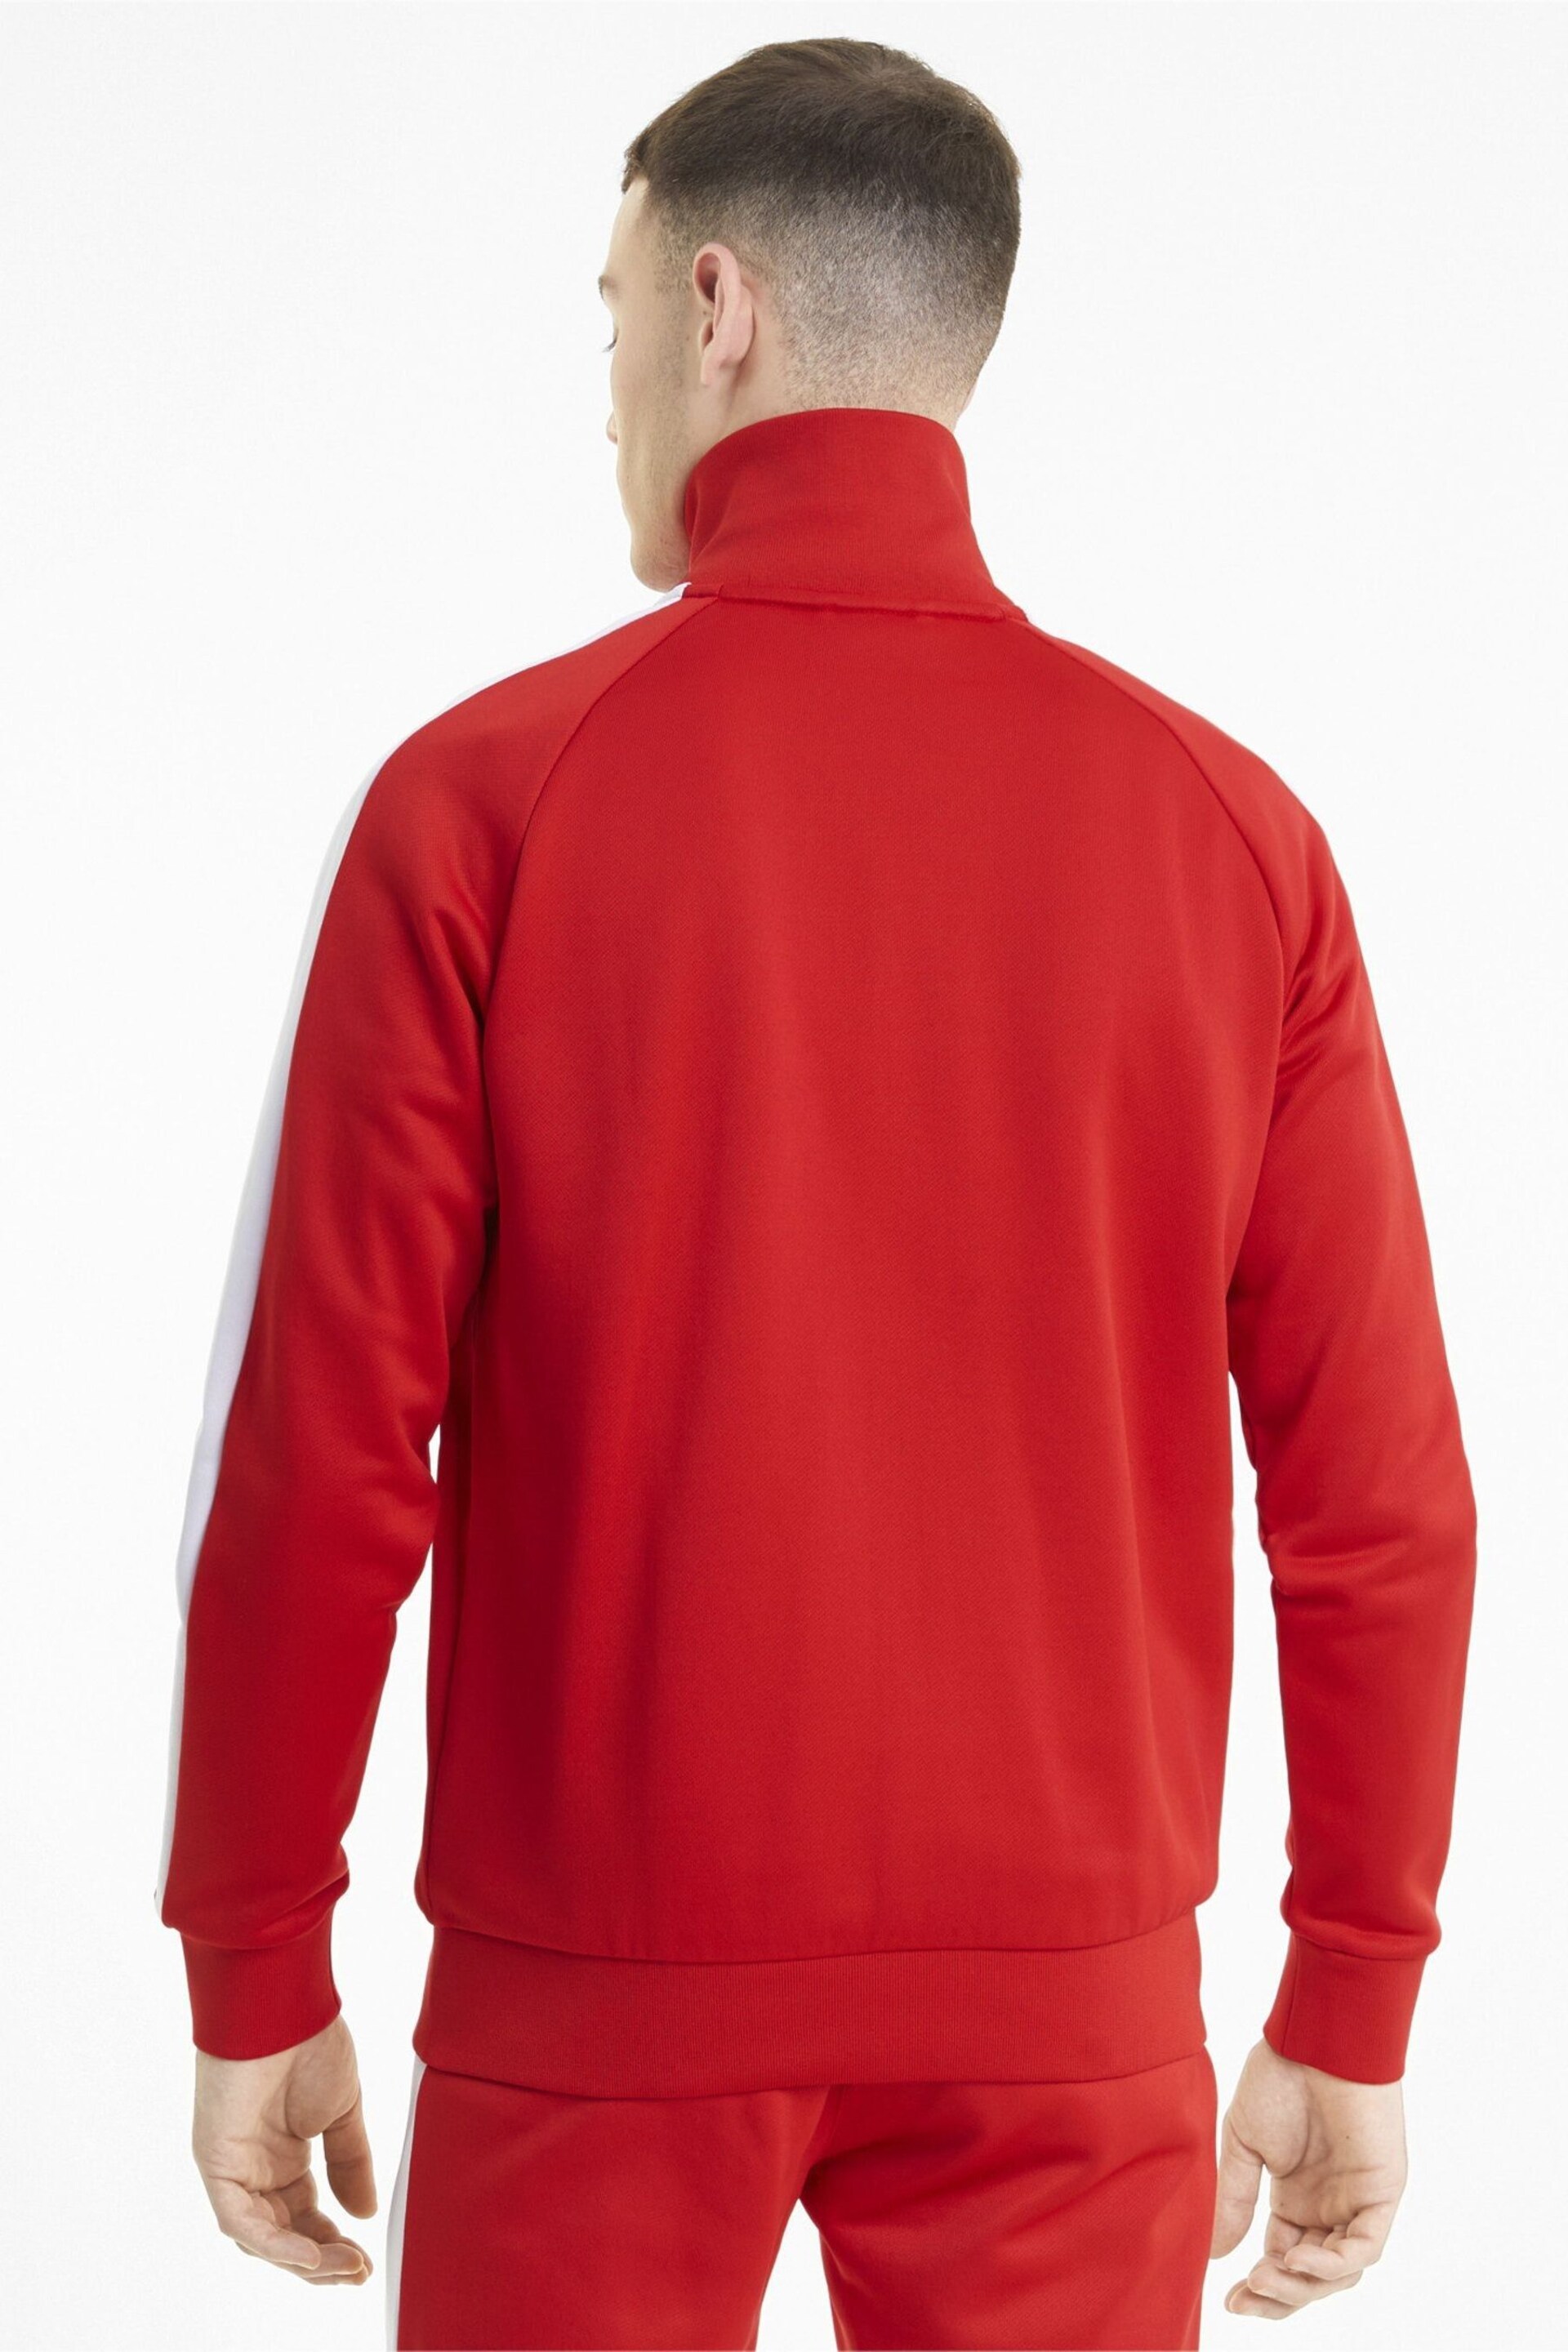 Puma Red Iconic T7 Mens Track Jacket - Image 2 of 5